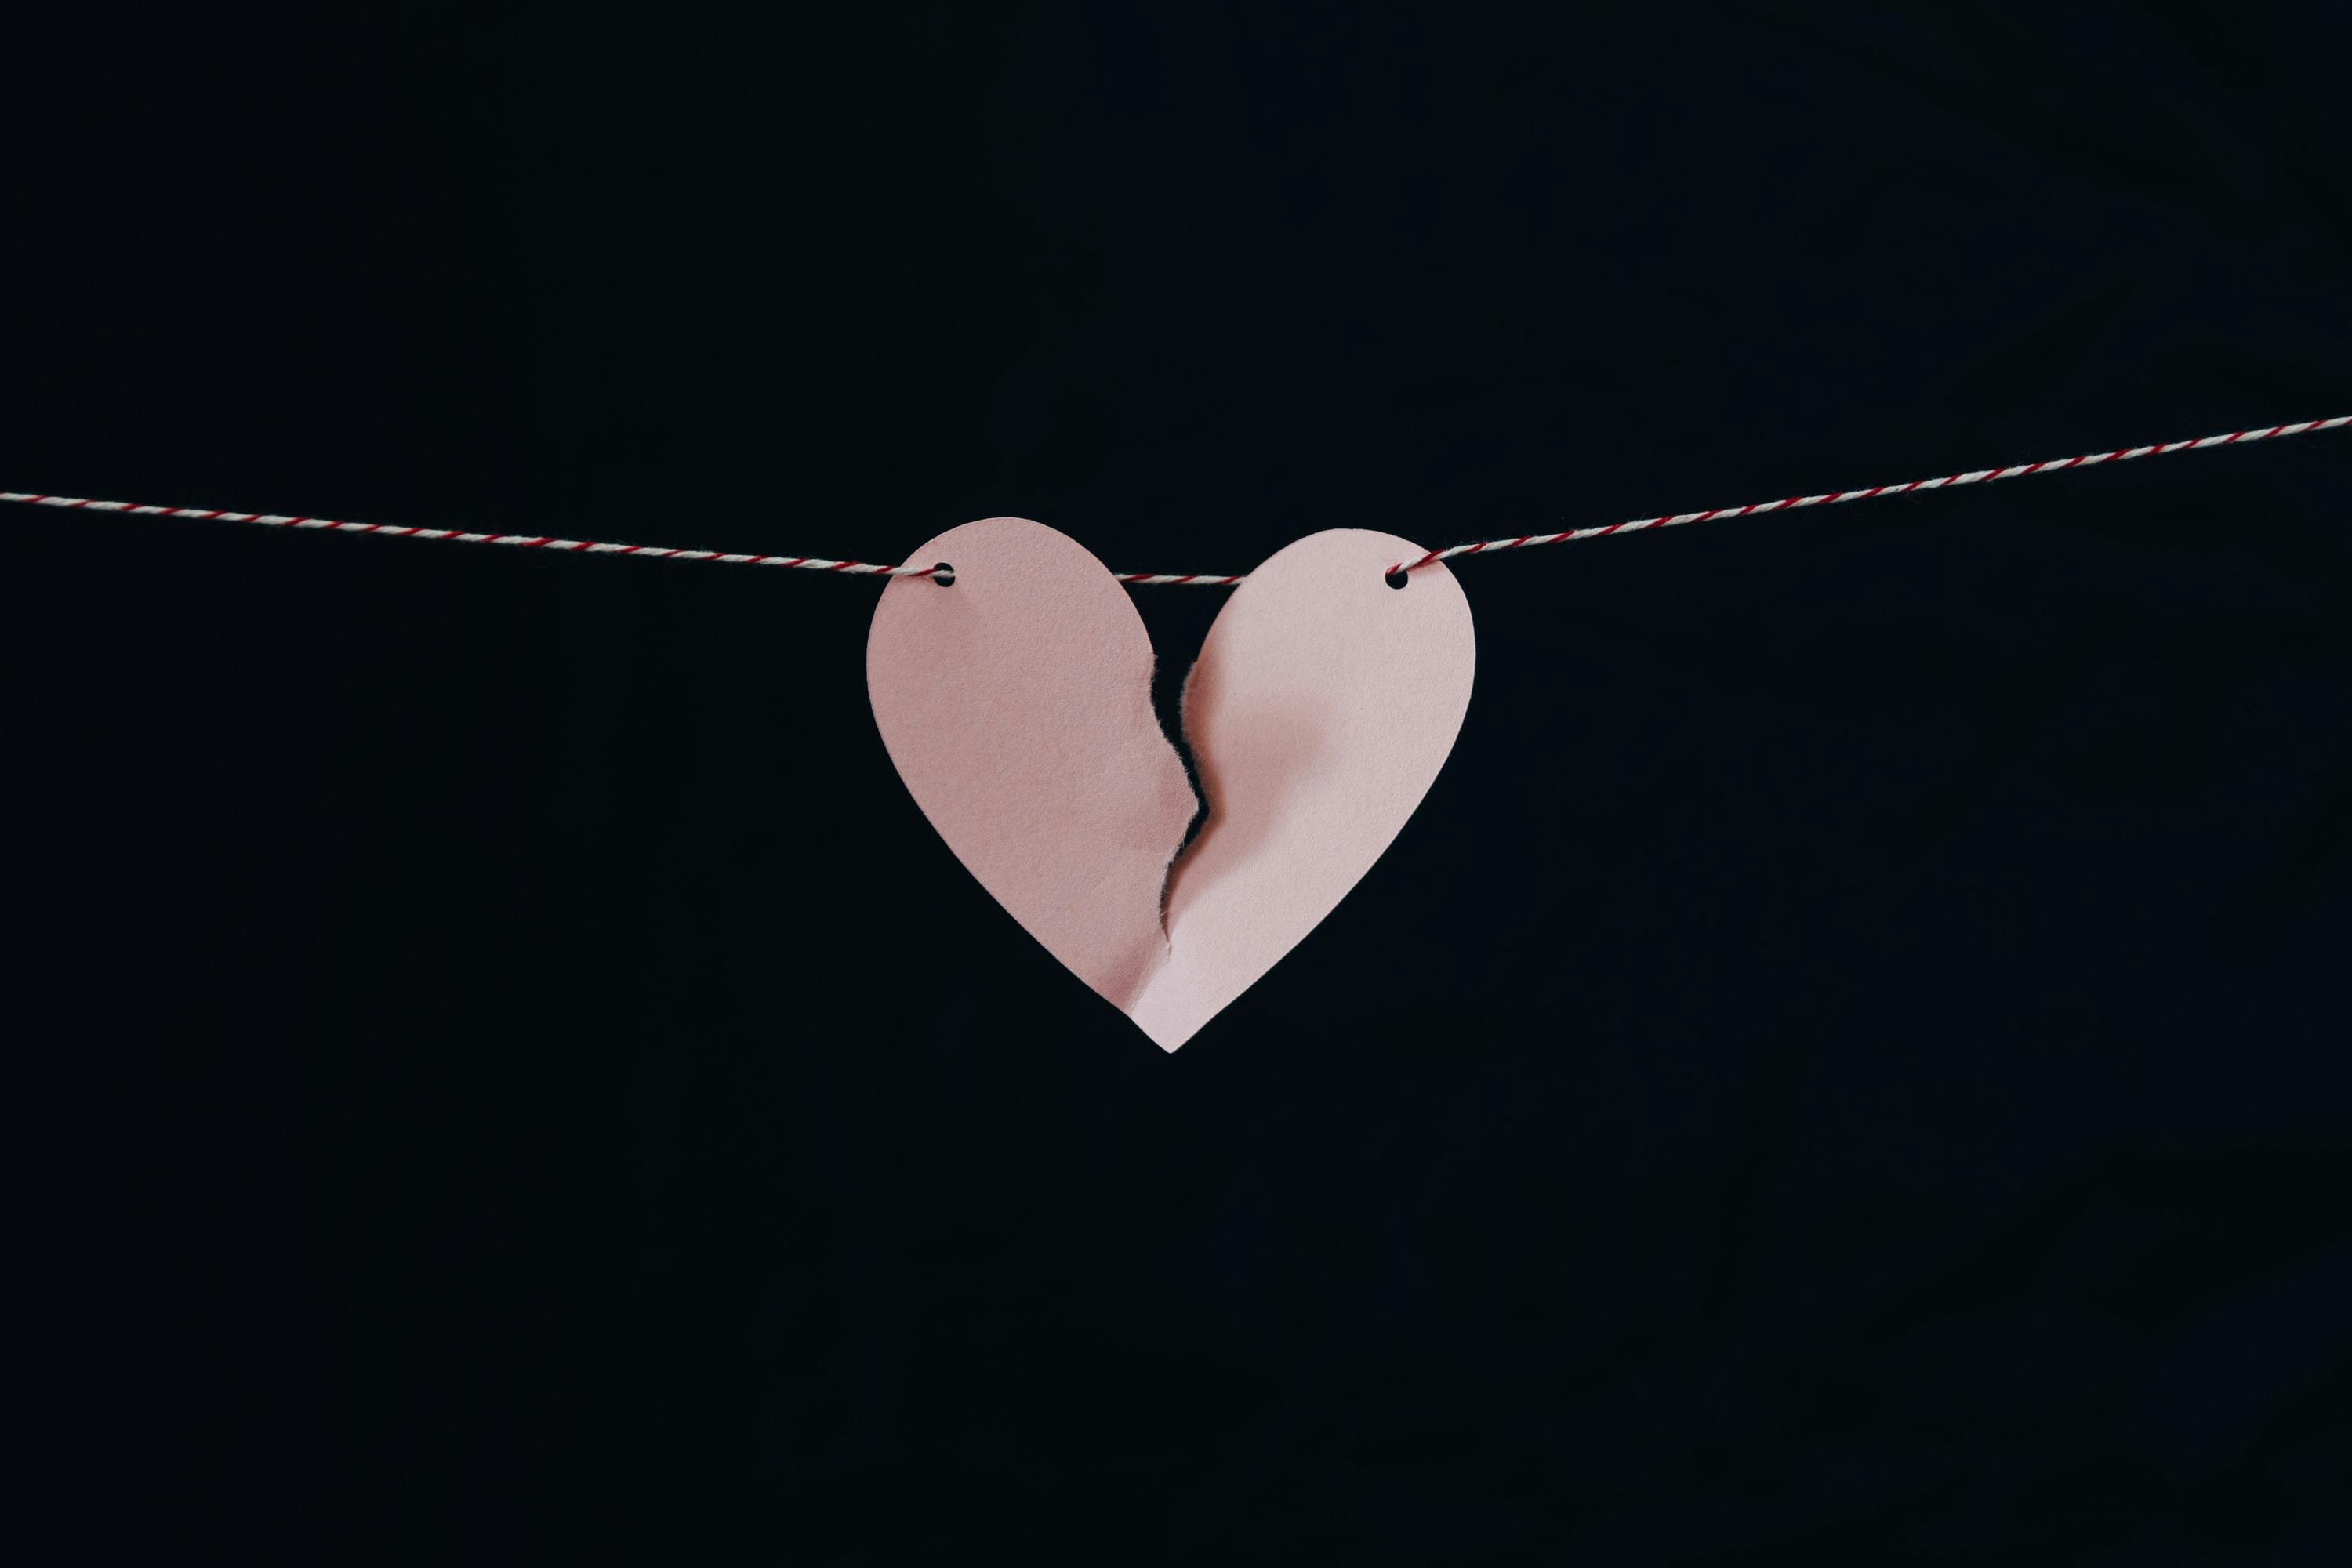 Pink paper heart broken in two, hanging on a string with a black background.